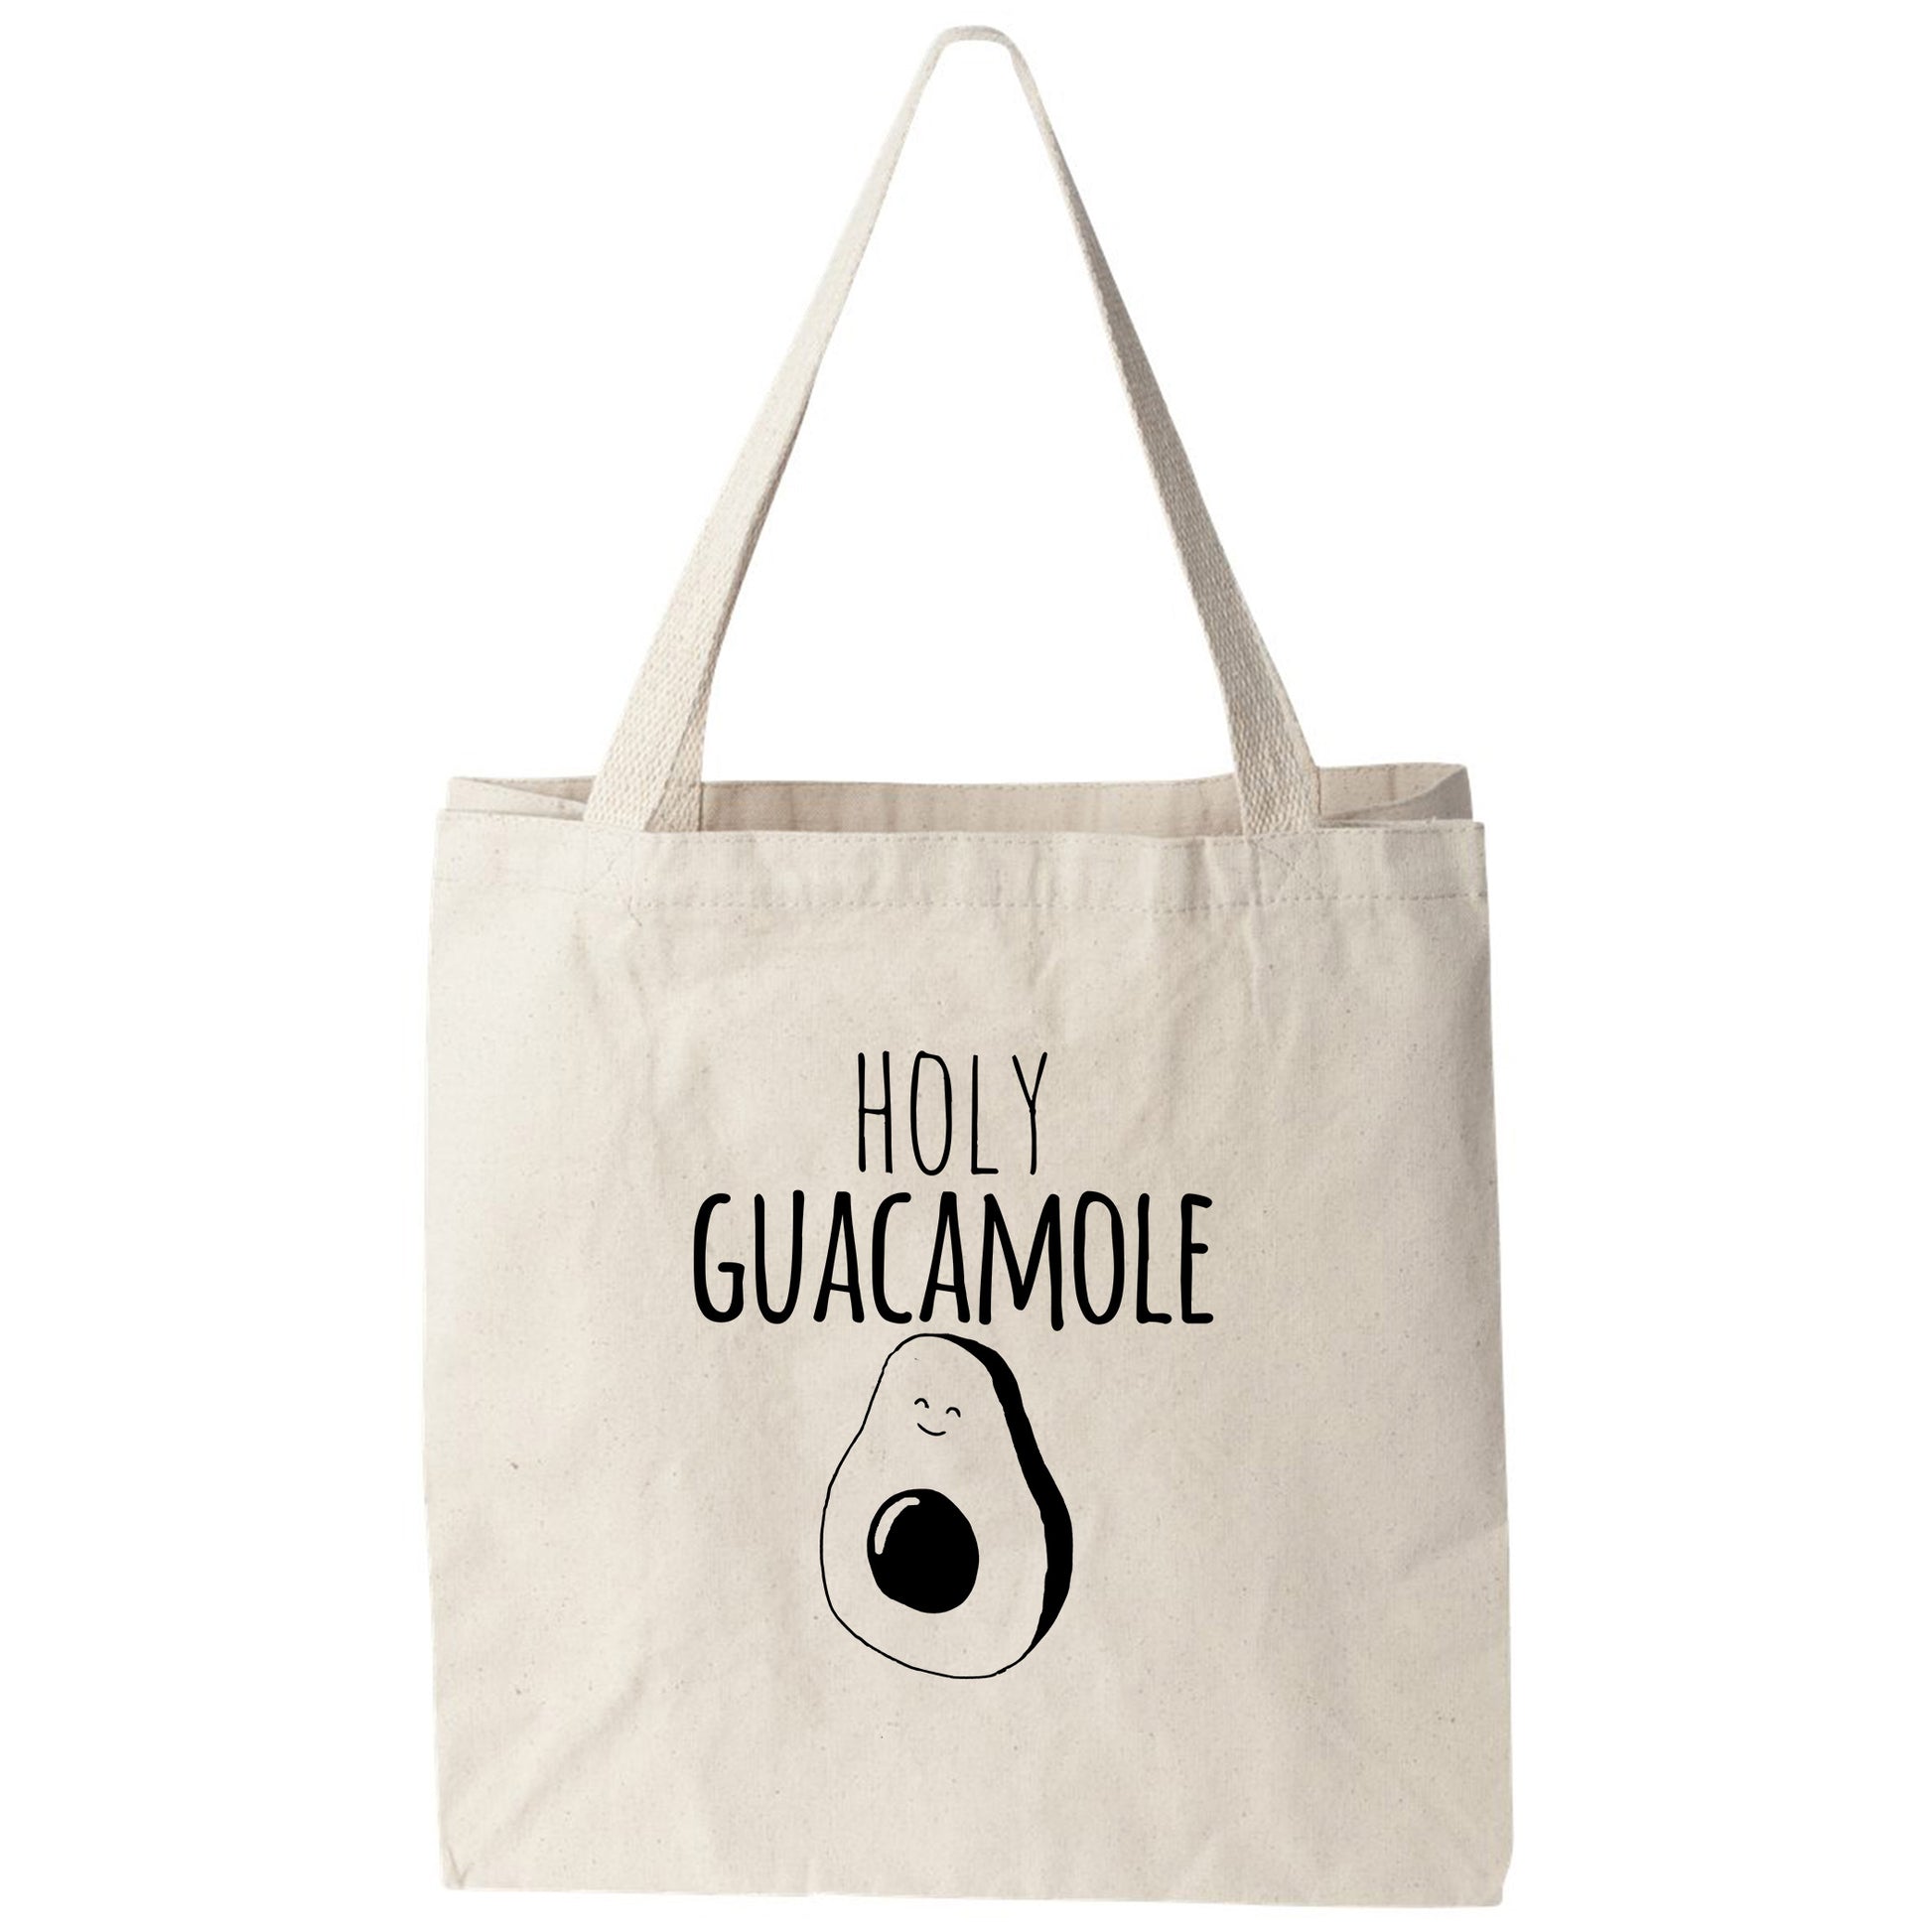 a tote bag with an avocado on it